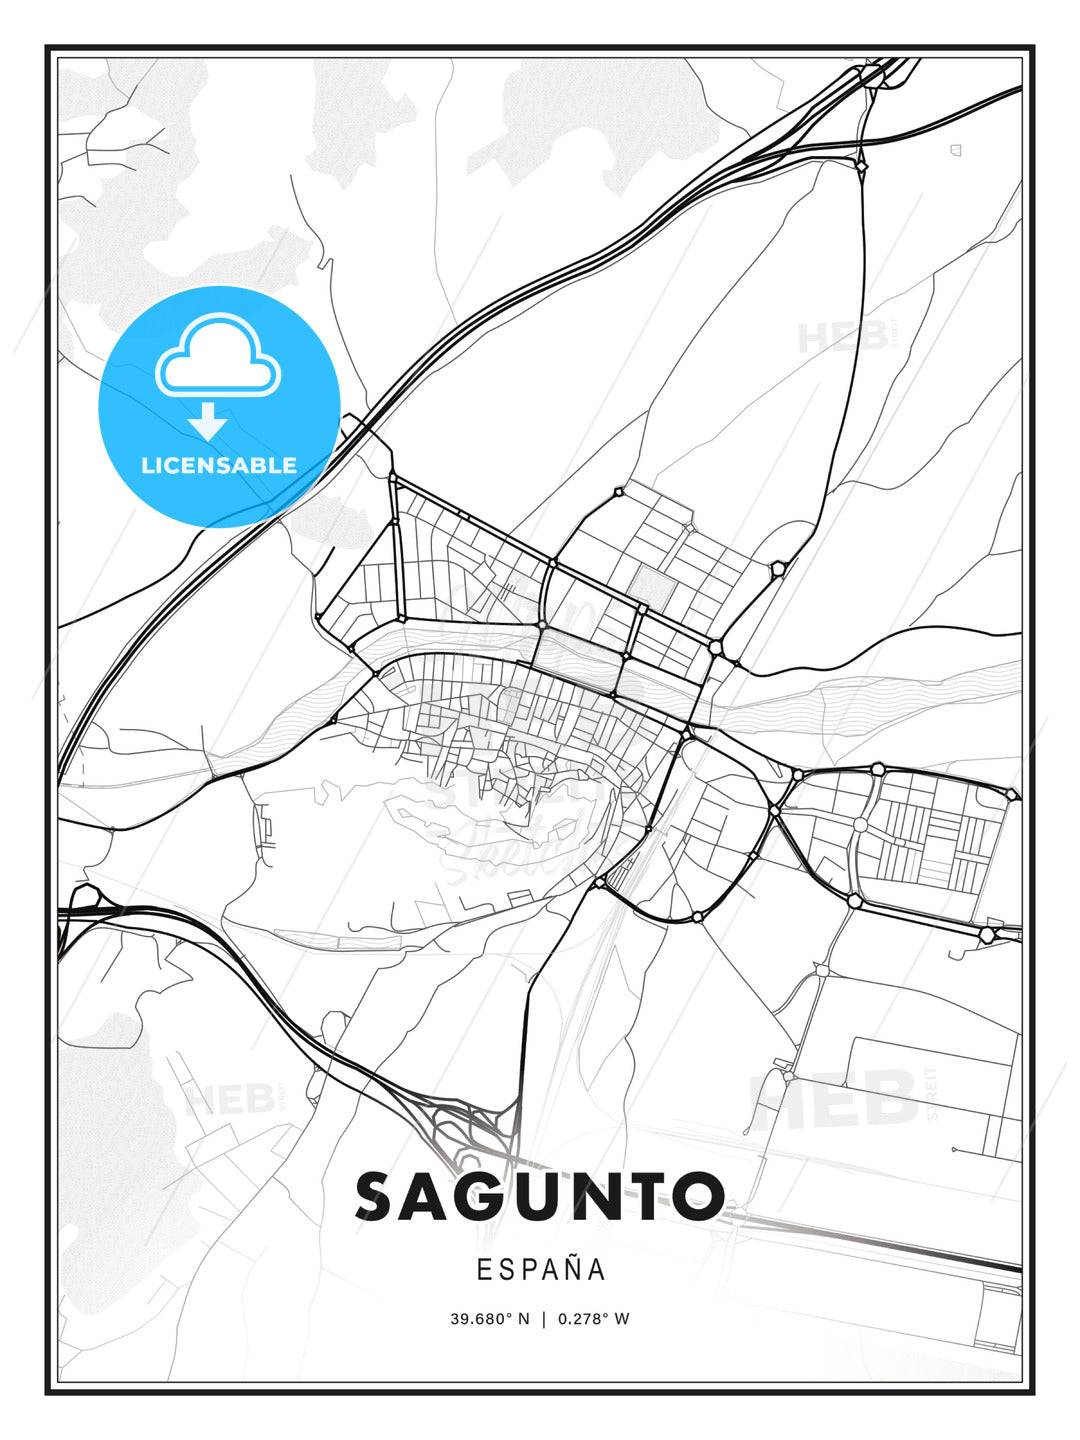 Sagunto, Spain, Modern Print Template in Various Formats - HEBSTREITS Sketches